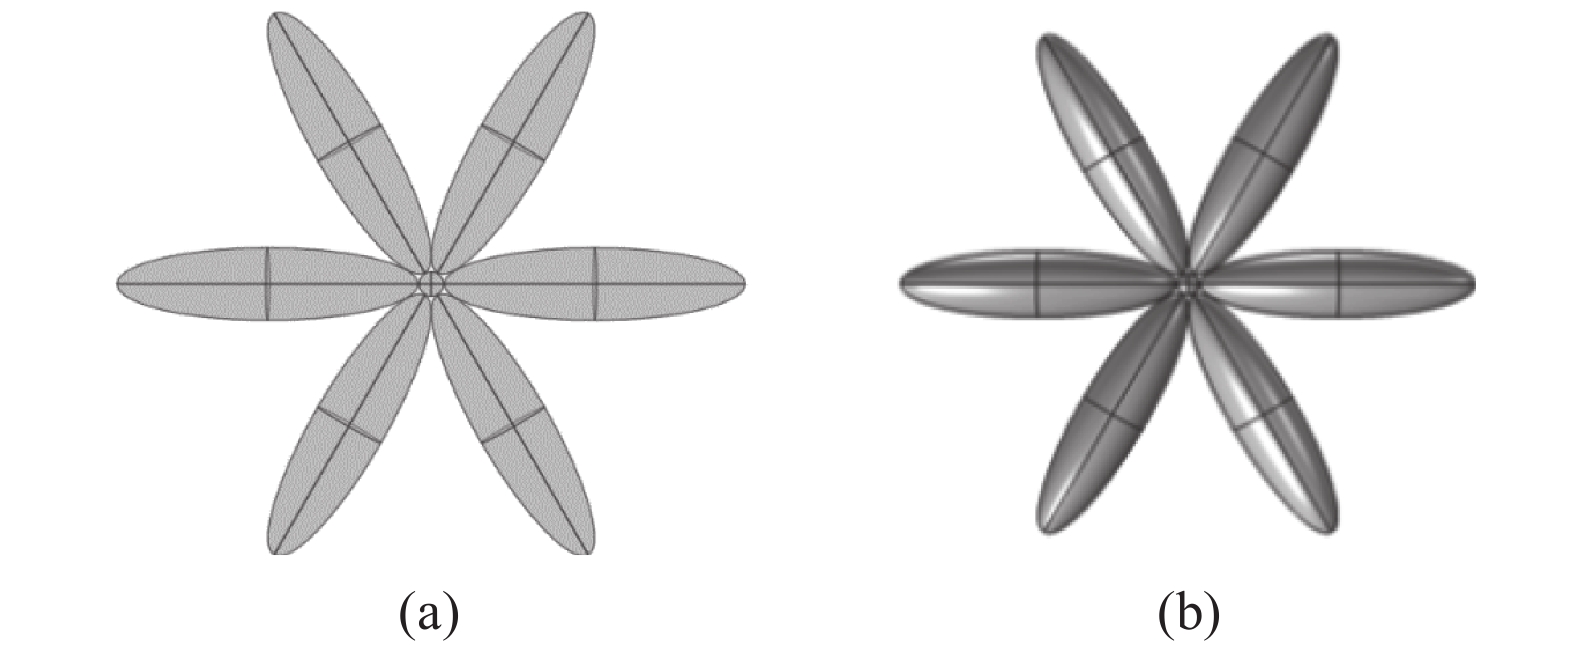 (a) Two-dimensional rice flower configuration; (b) Three-dimensional rice flower configuration